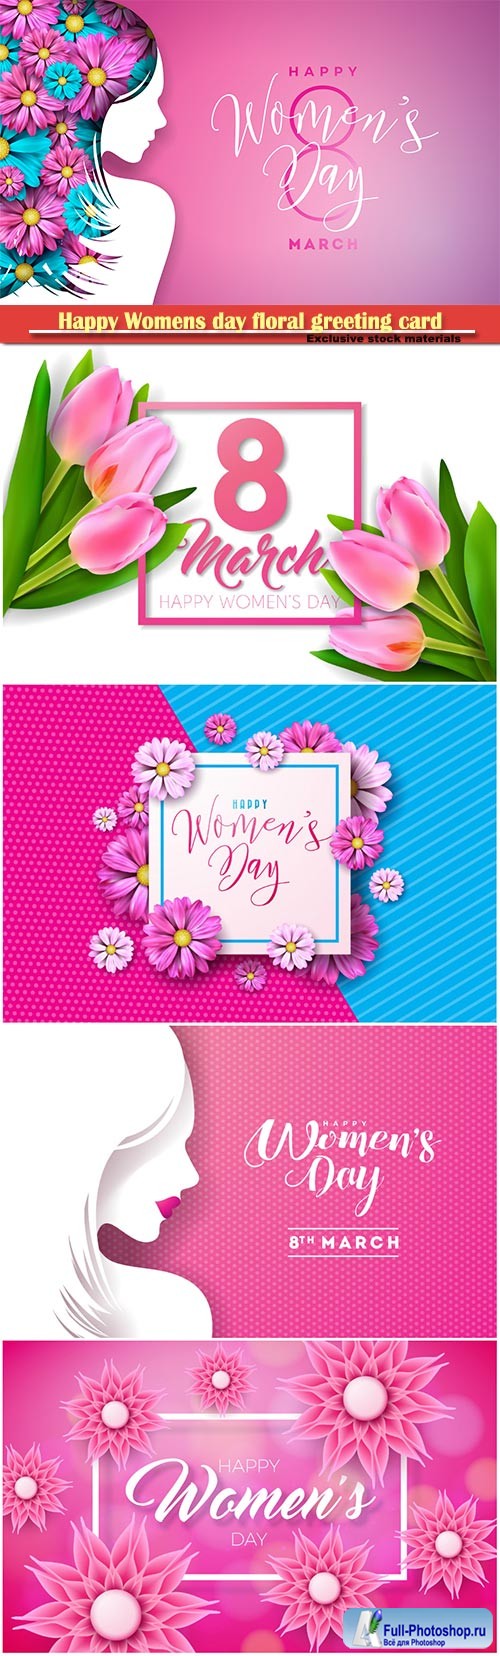 Happy Womens day floral greeting card, international female holiday Illustration, 8 March